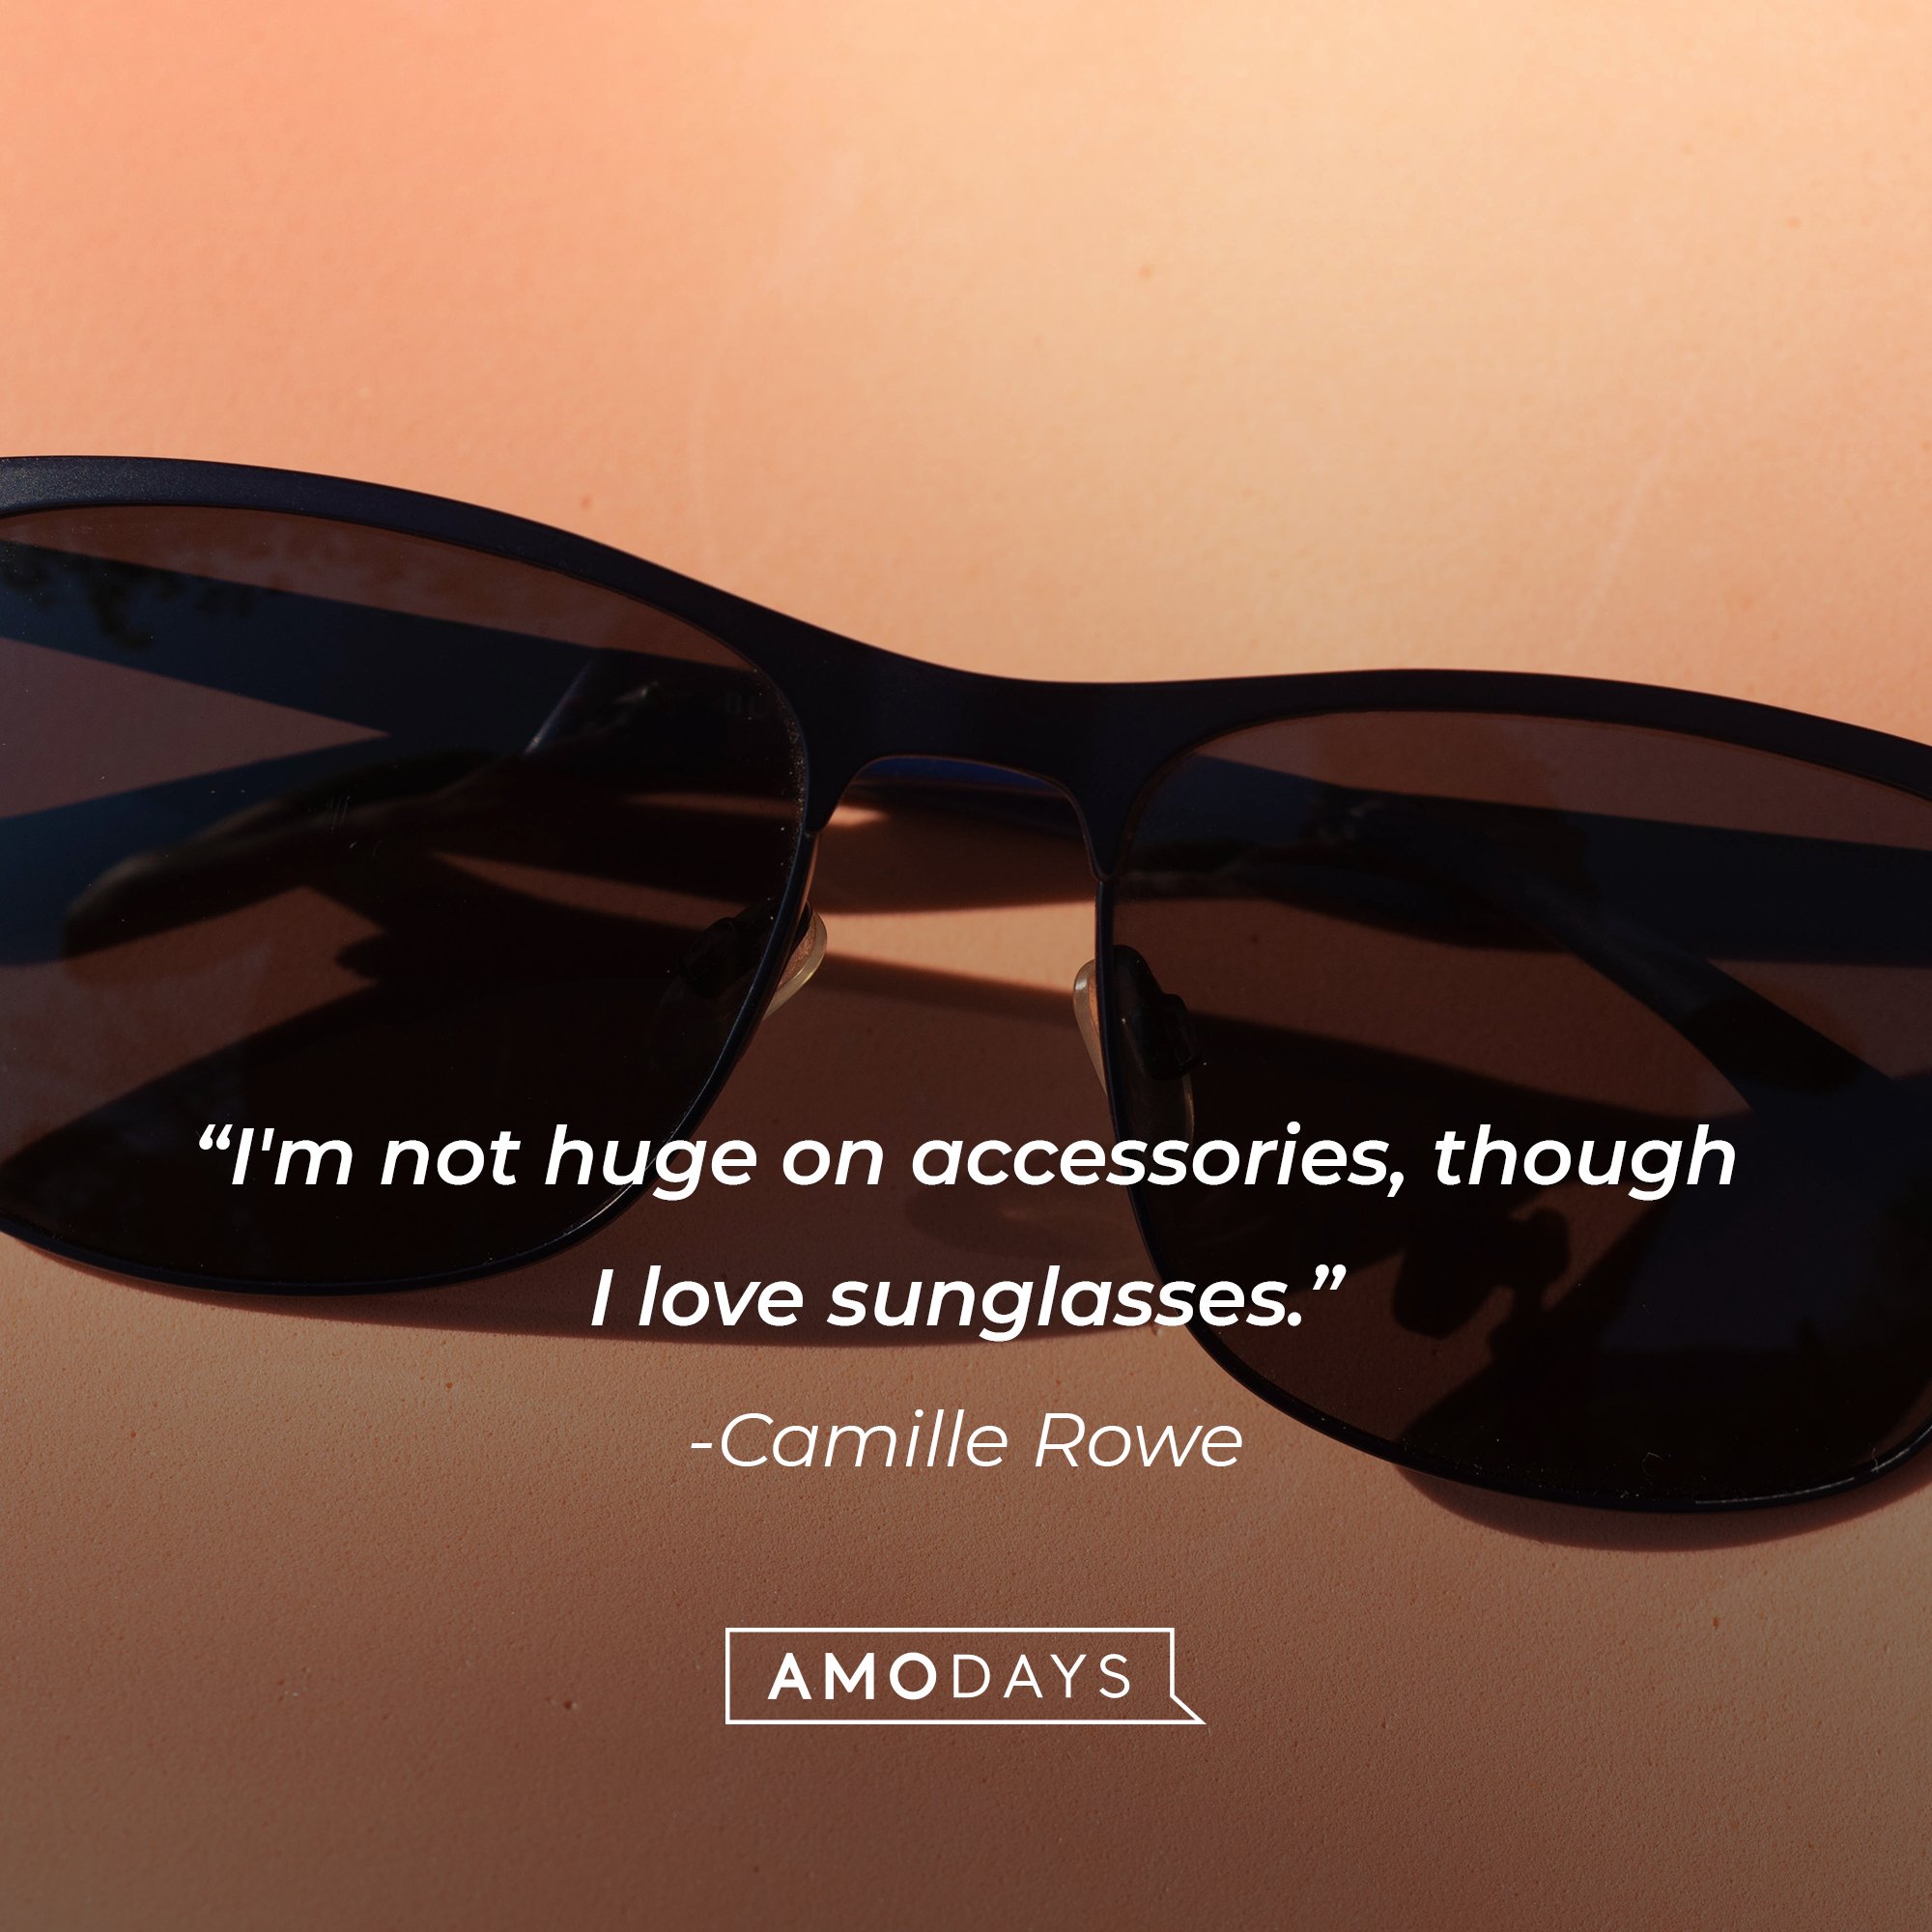 Camille Rowe’s quote: "I'm not huge on accessories, though I love sunglasses." | Image: AmoDays 